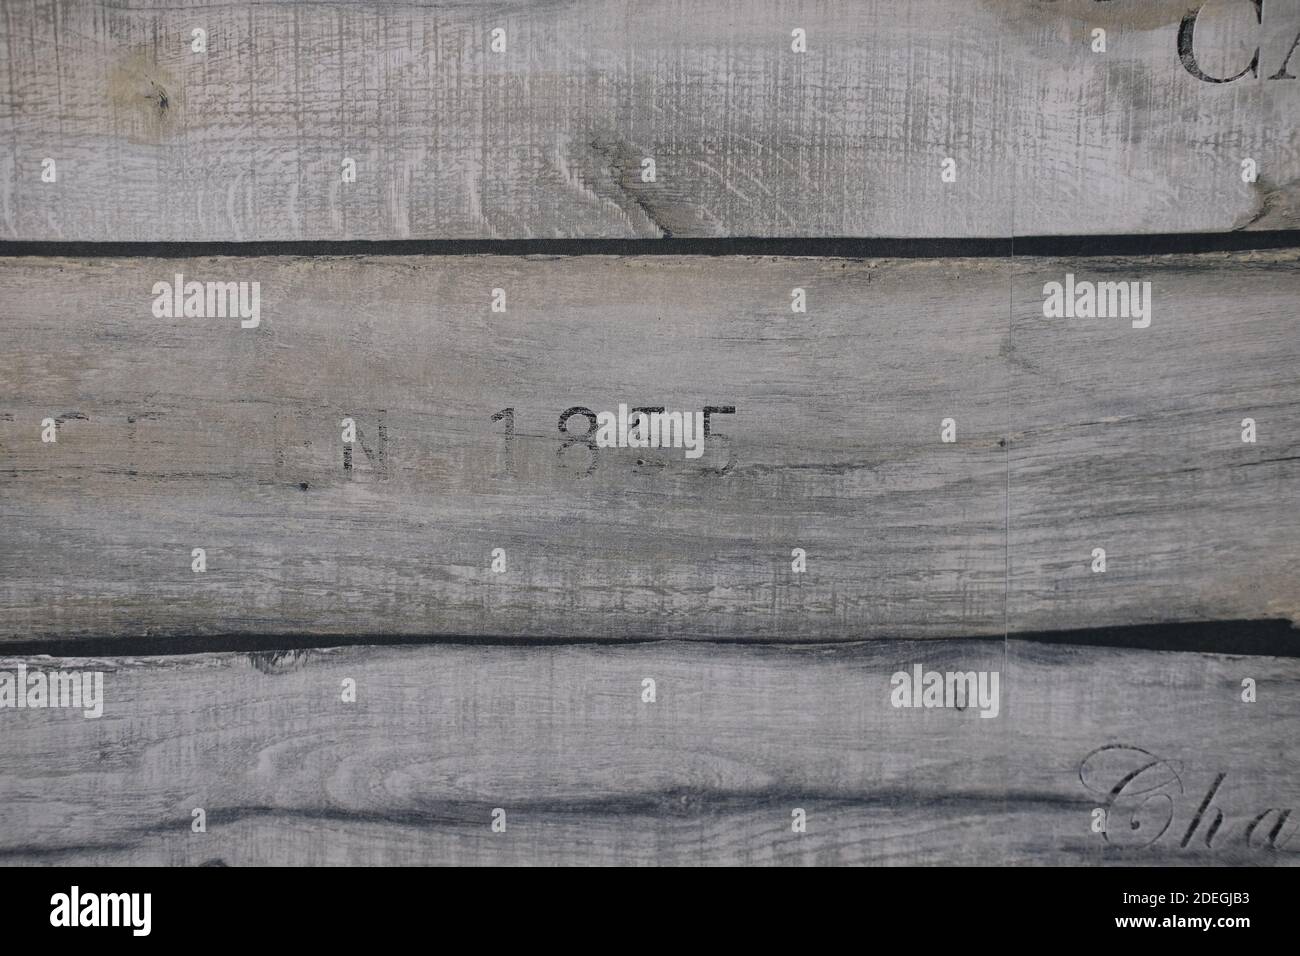 wooden texture of three planks with number 1855 embrassed on it Stock Photo